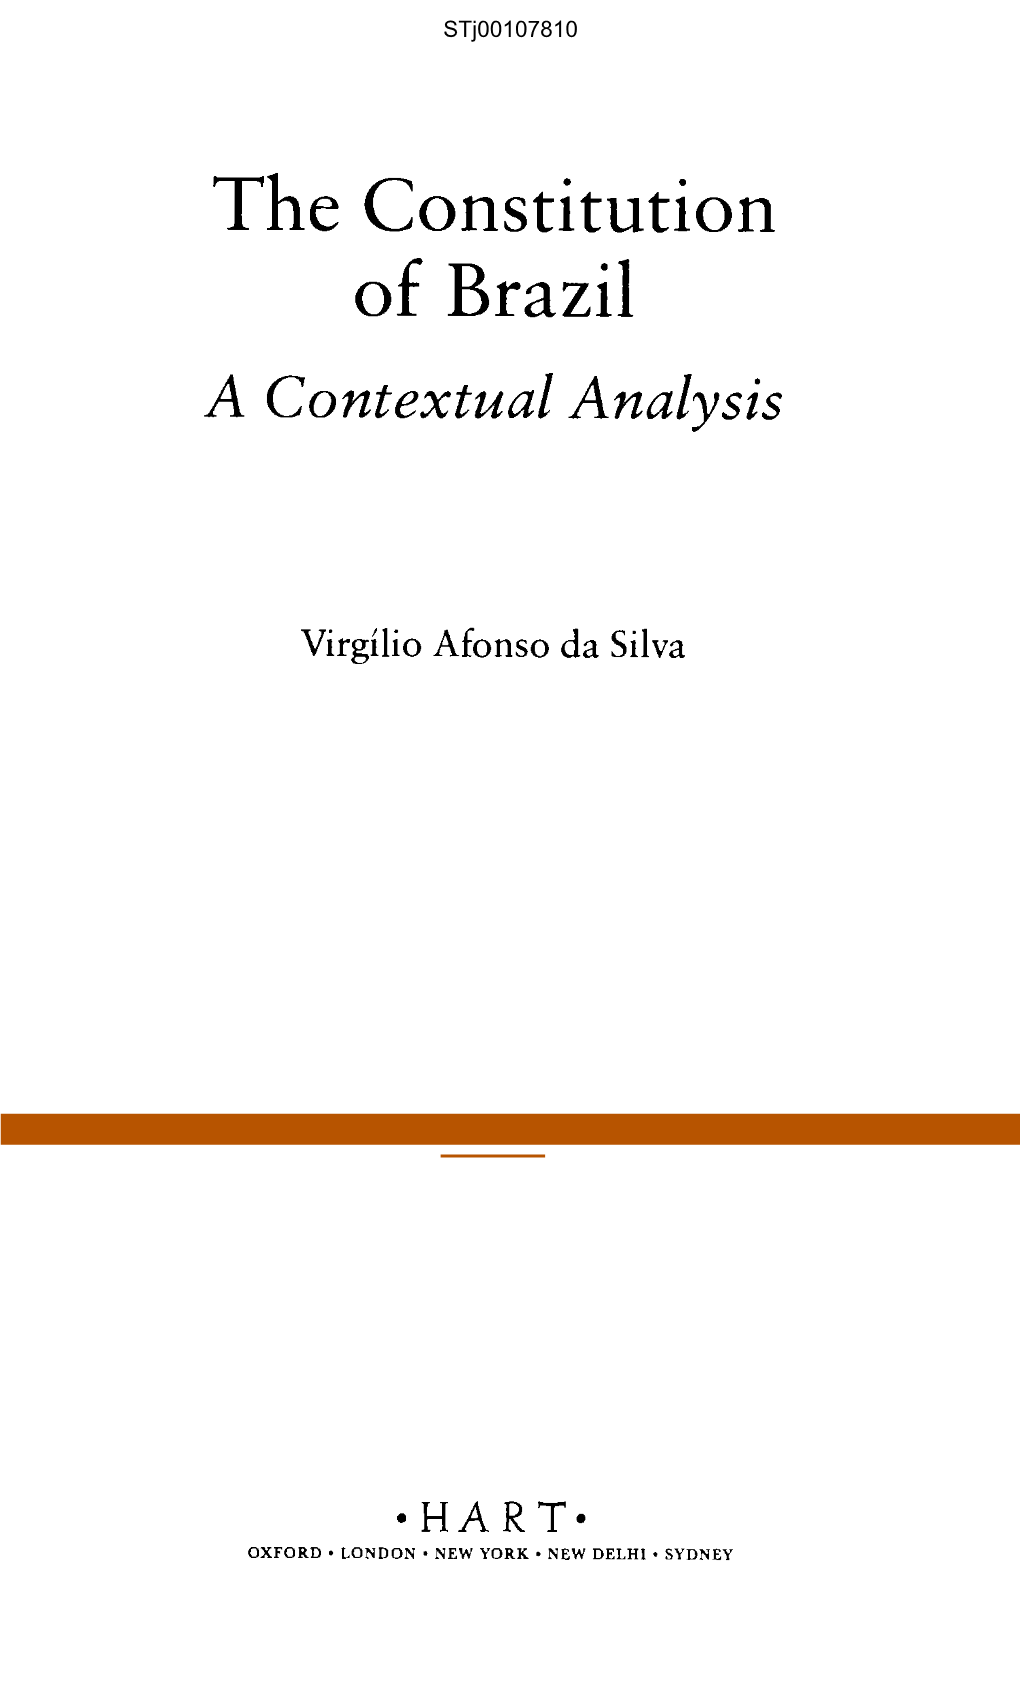 The Constitution of Brazil a Contextual Analysis